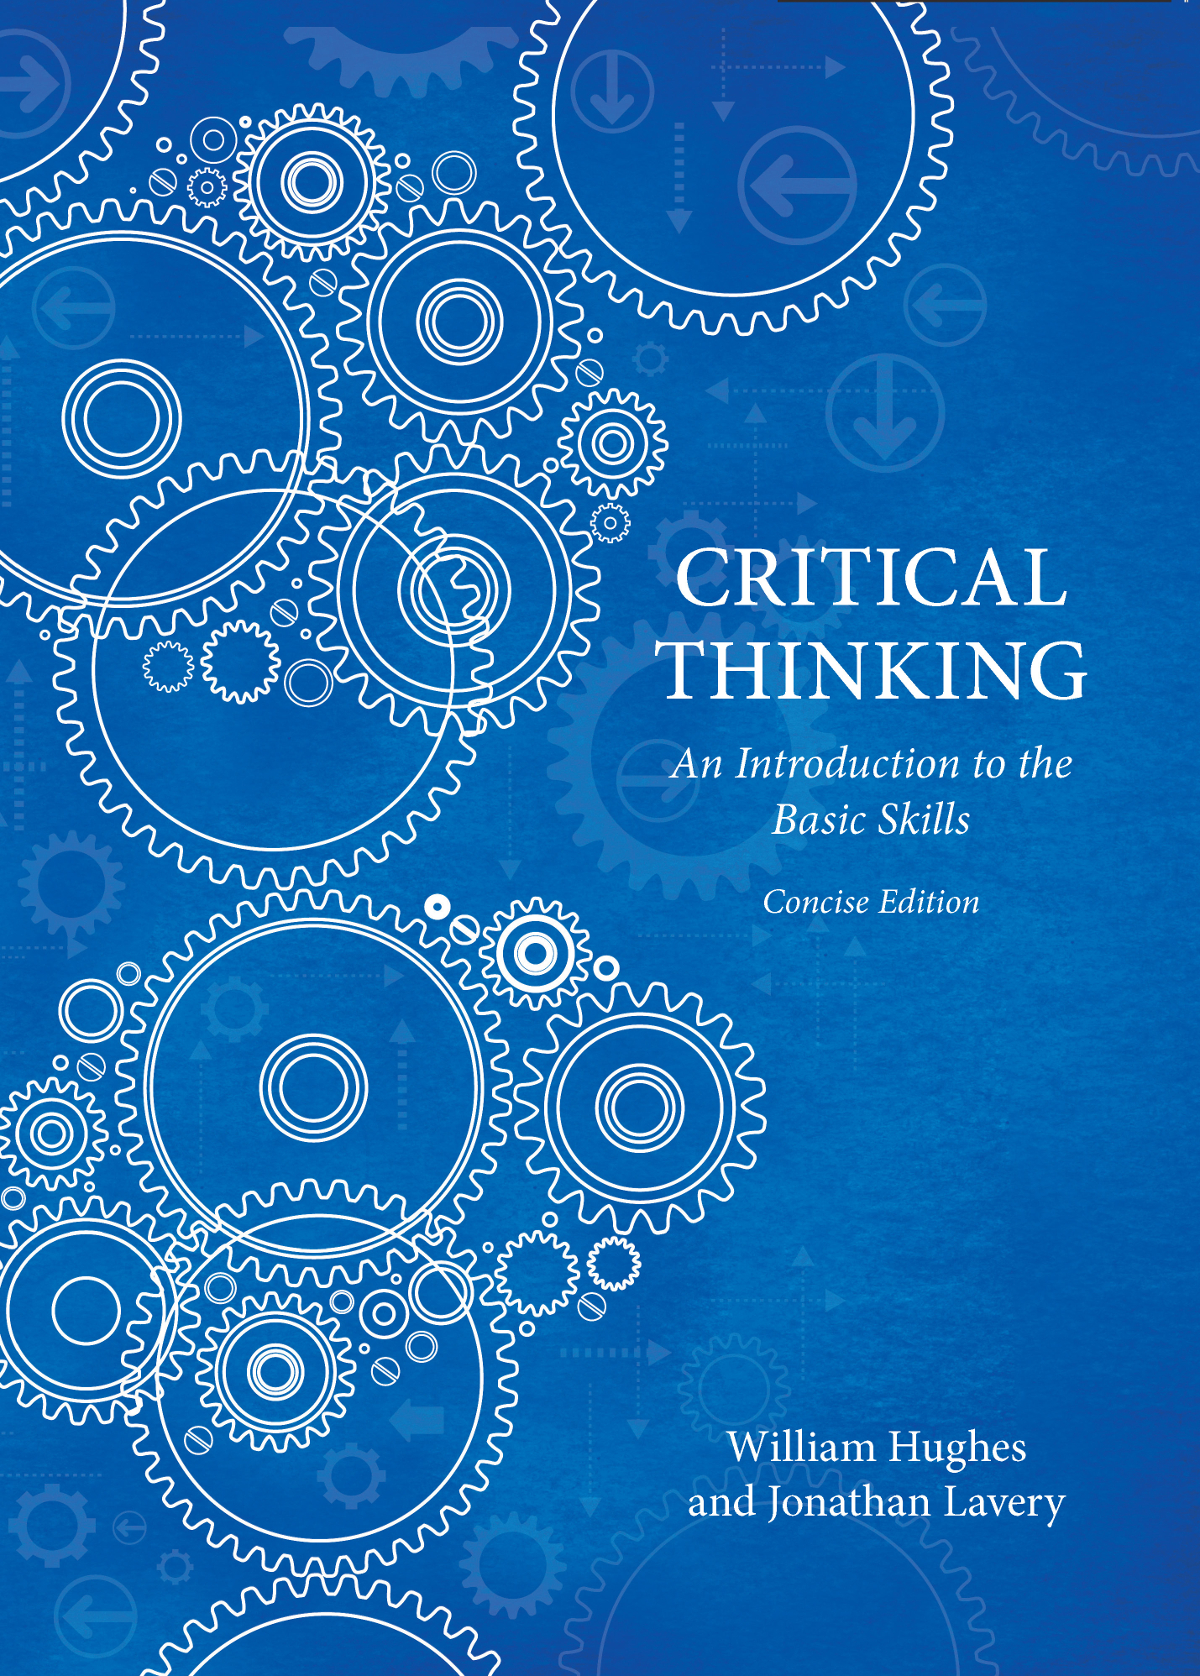 critical thinking picture book